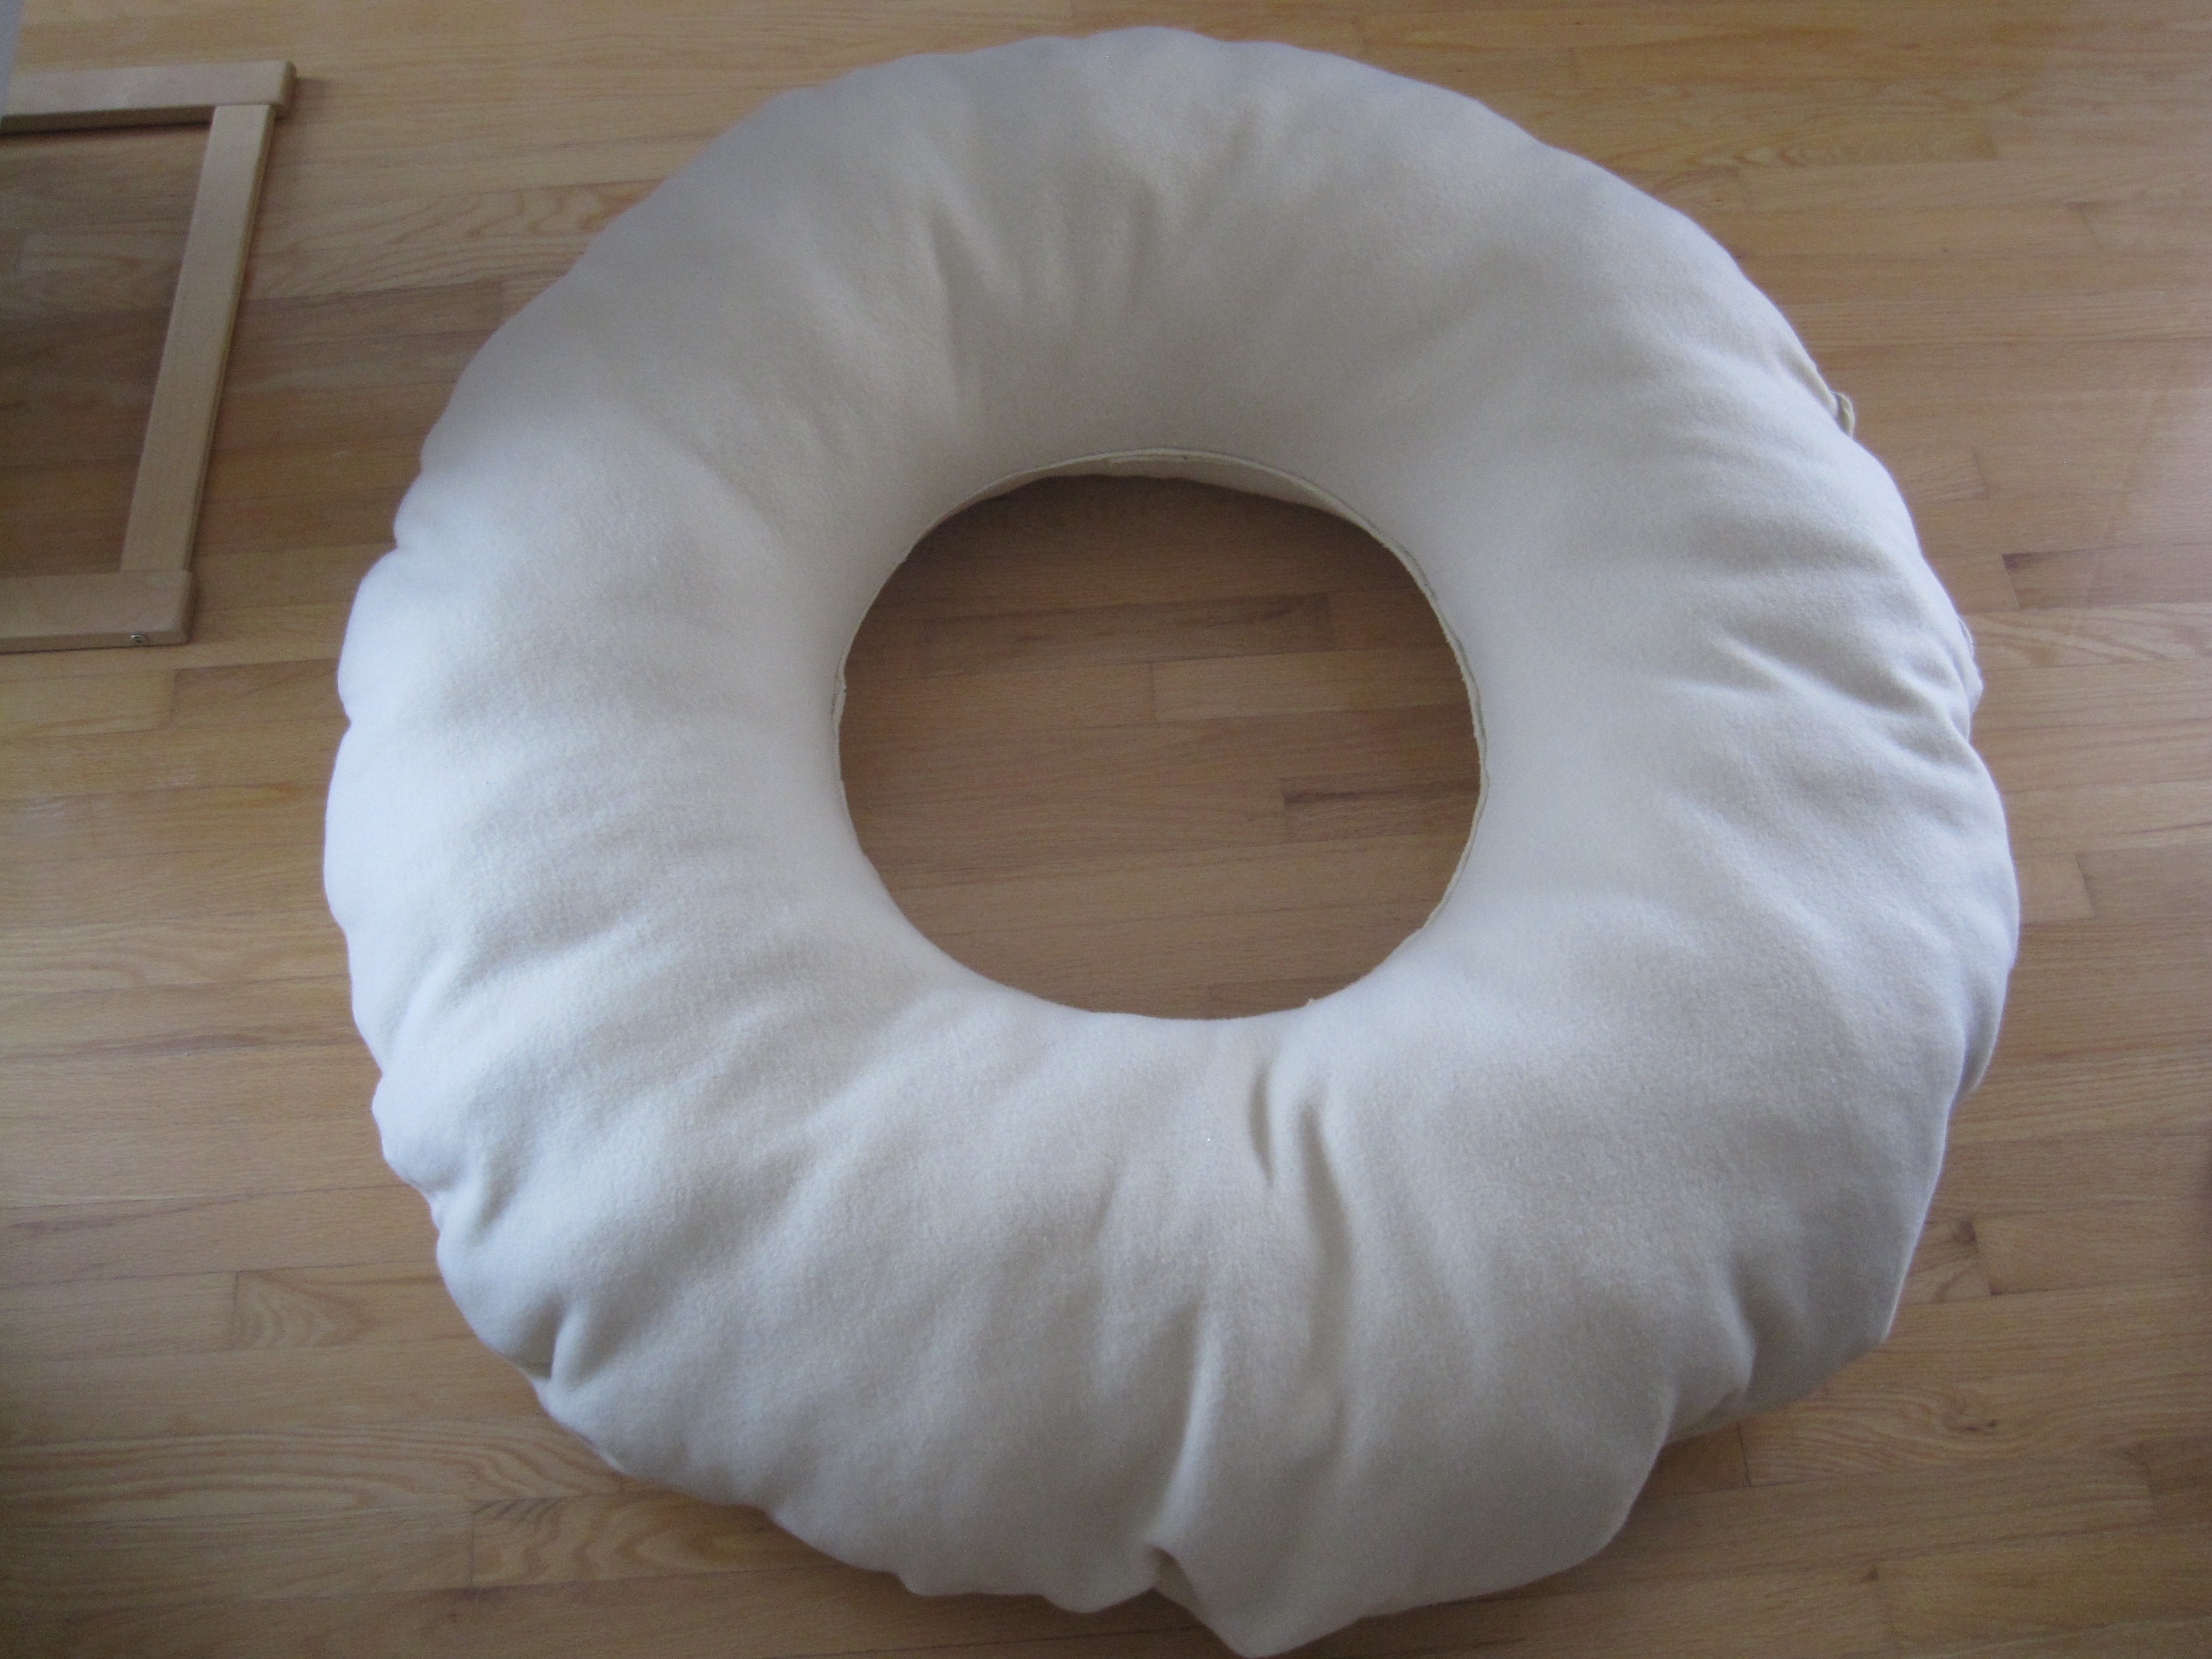 How to Make a Donut Pillow (or a Giant Donut Halloween Costume